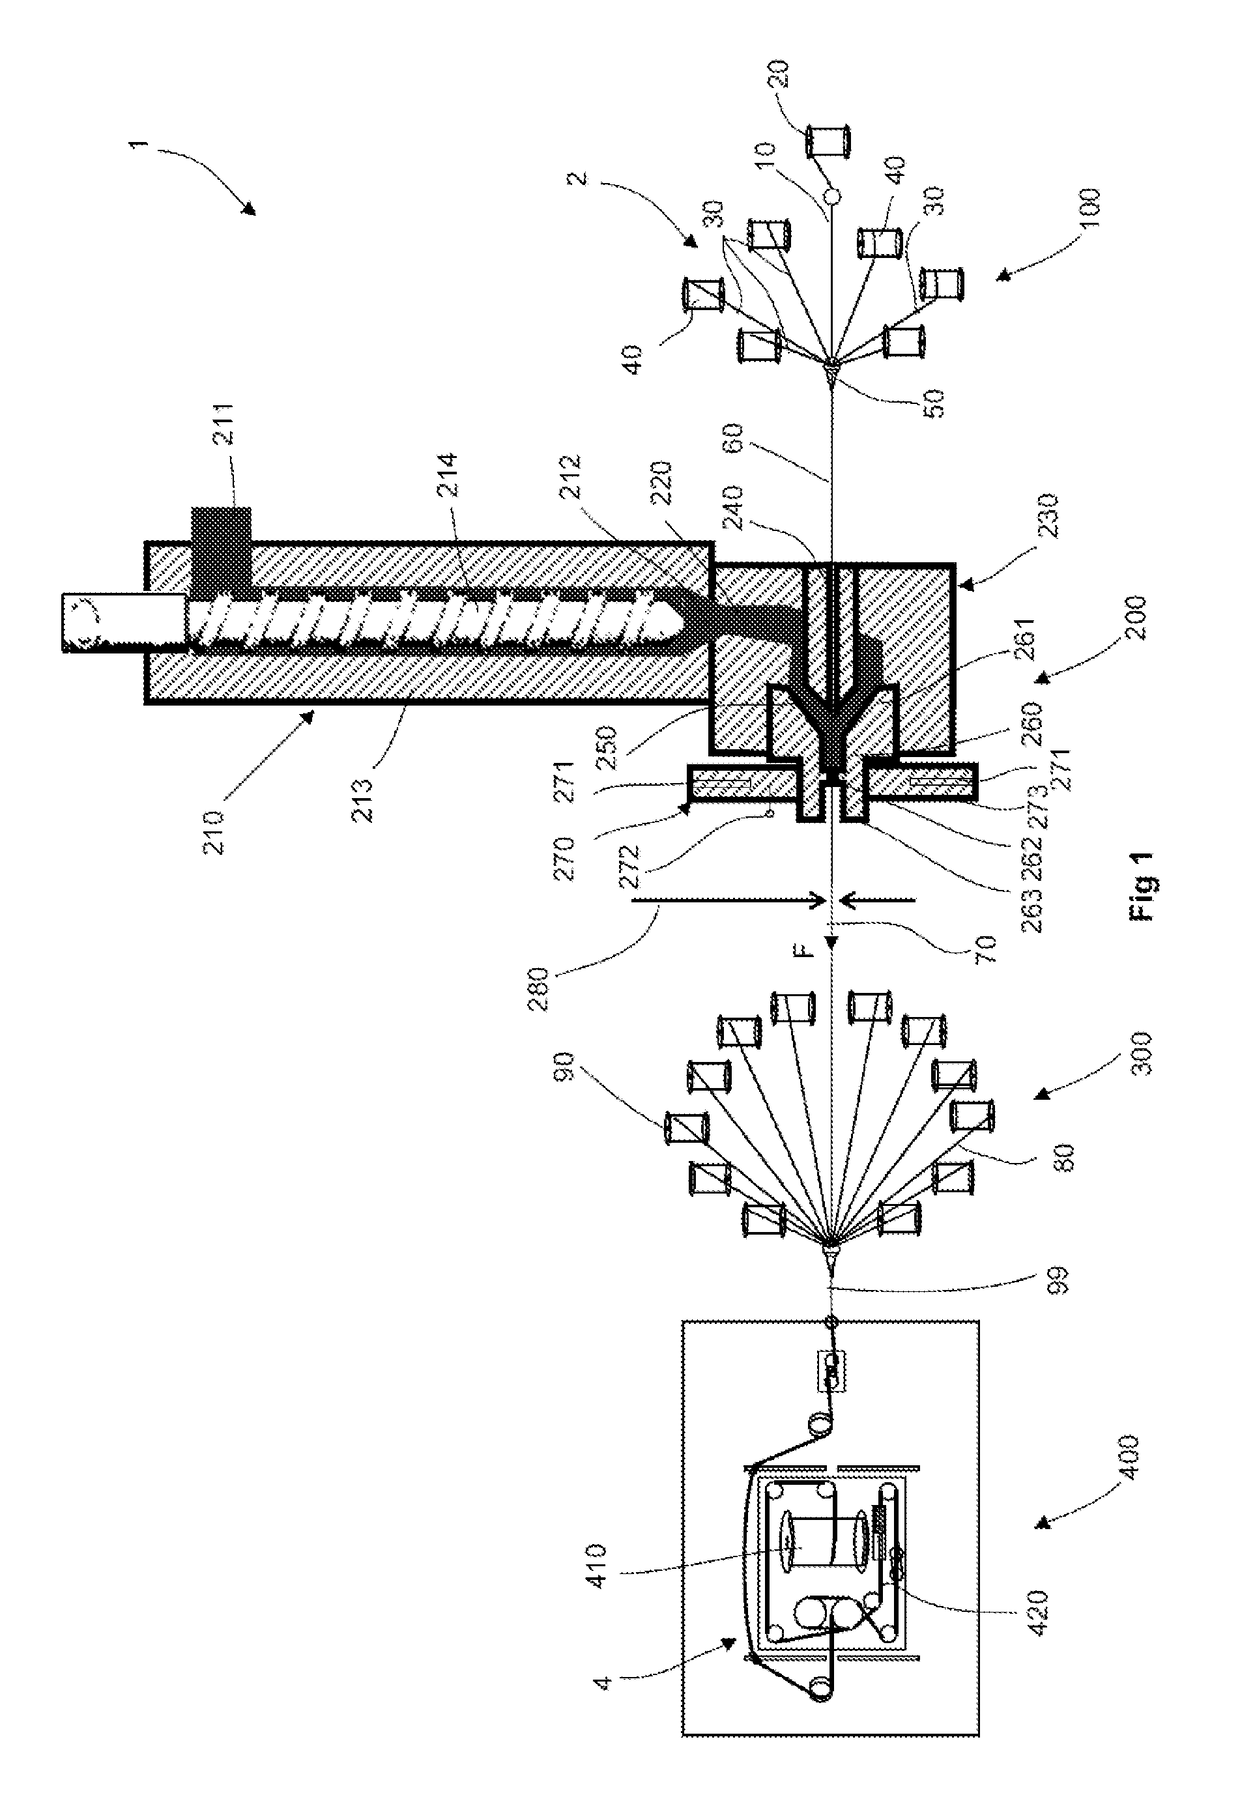 Method and device for producing rubber-coated metal wire